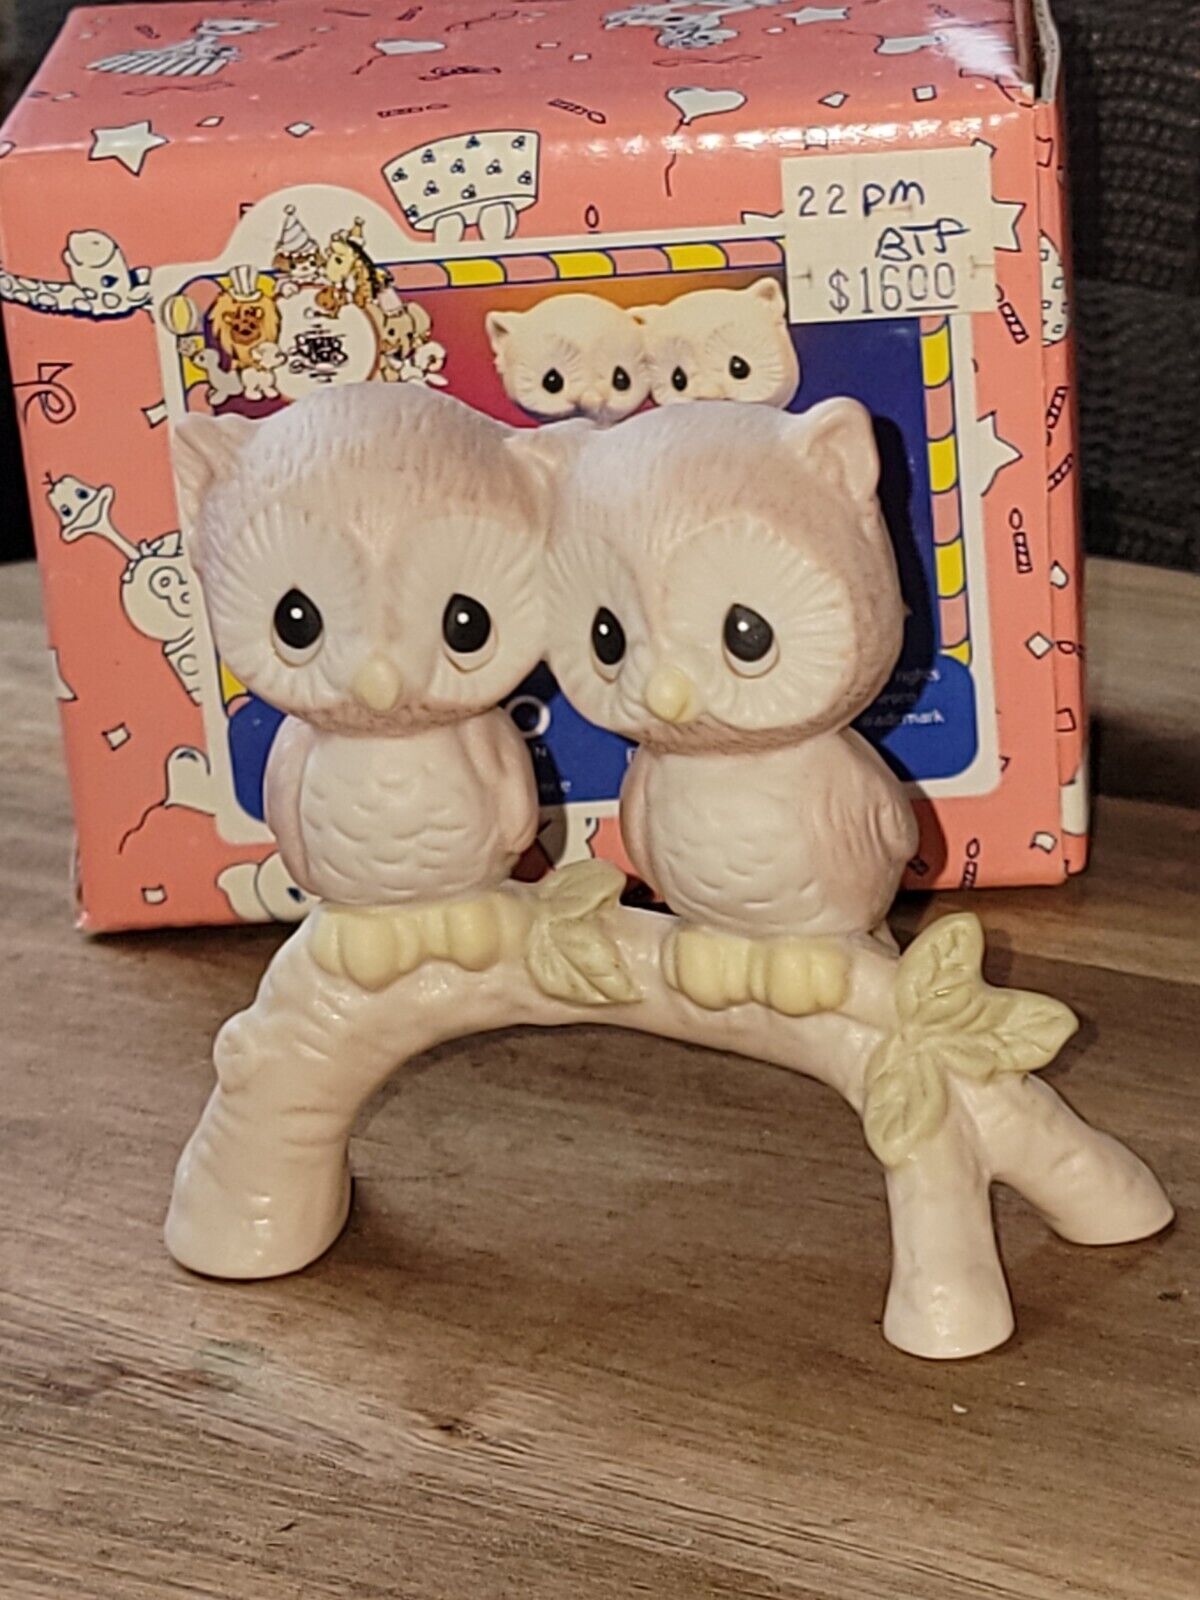 1993 Precious Moments Owl Always Be Your Friend Figurine #BC932 Boxed Owl on Bra